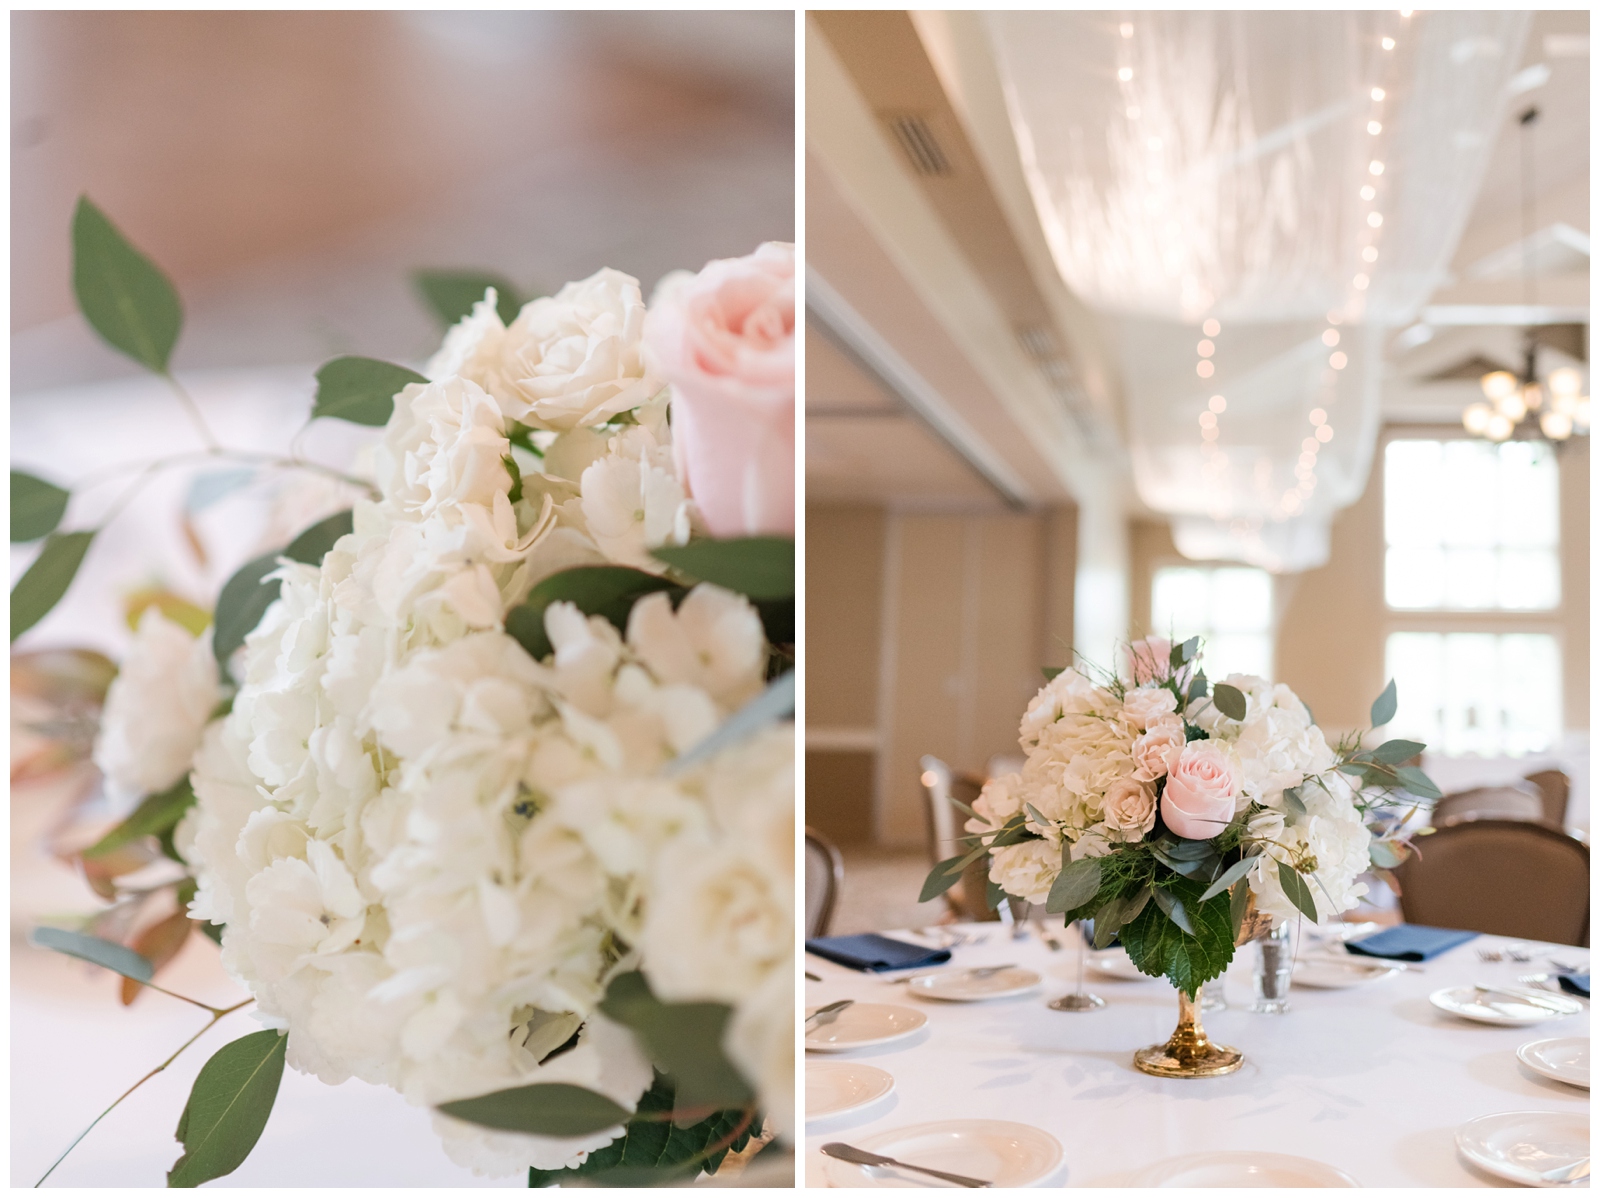 wedding reception centerpieces of white flowers with pale pink roses in gold vase by Madison House Designs